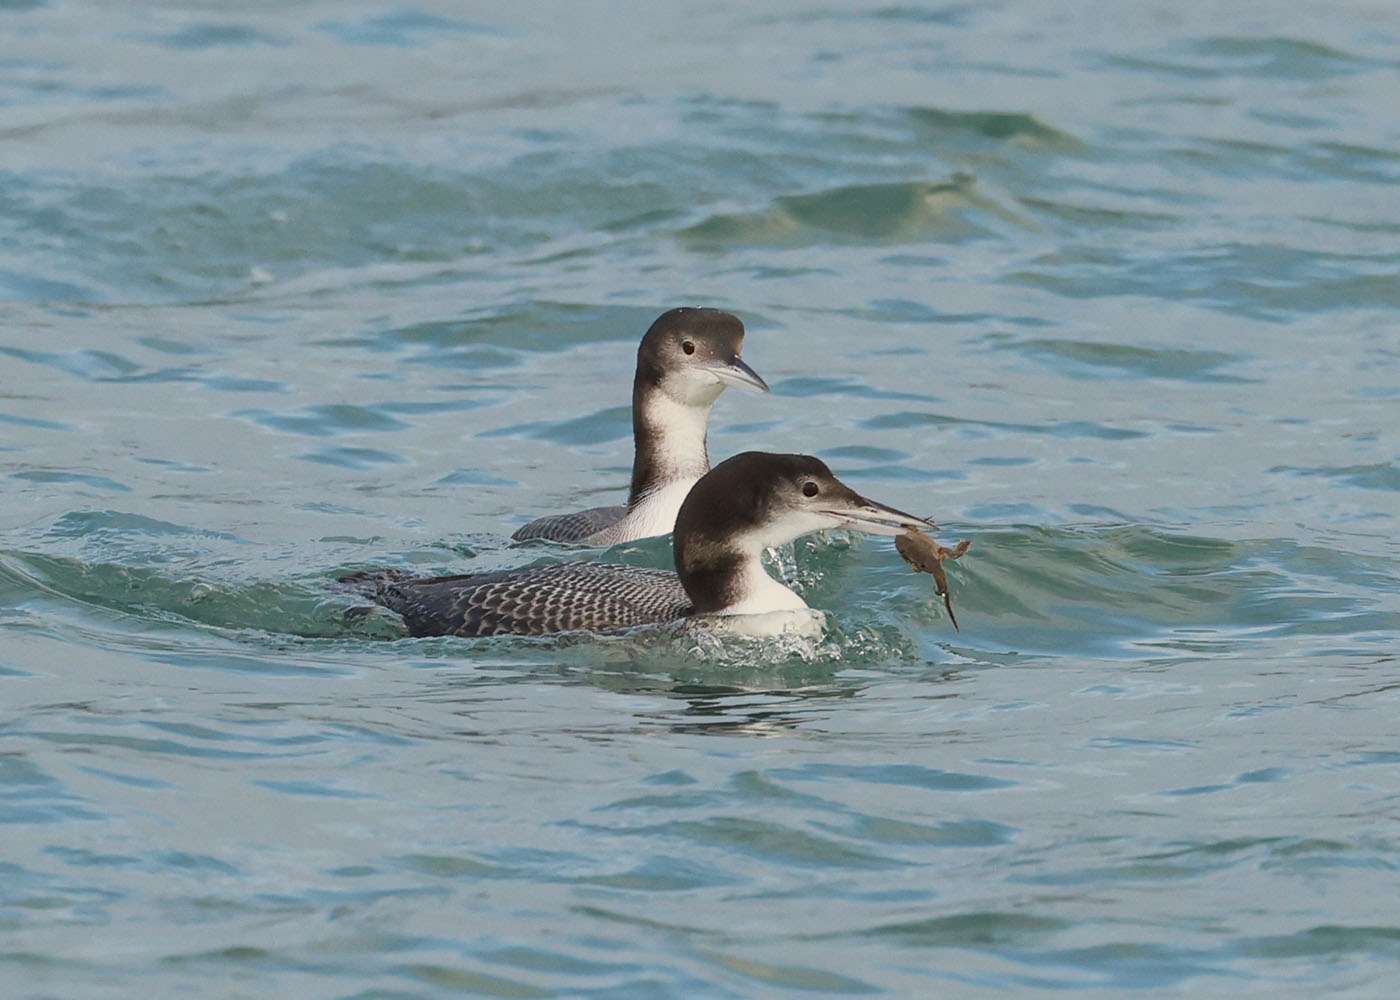 Great Northern Diver by Steve Hopper at Brixham